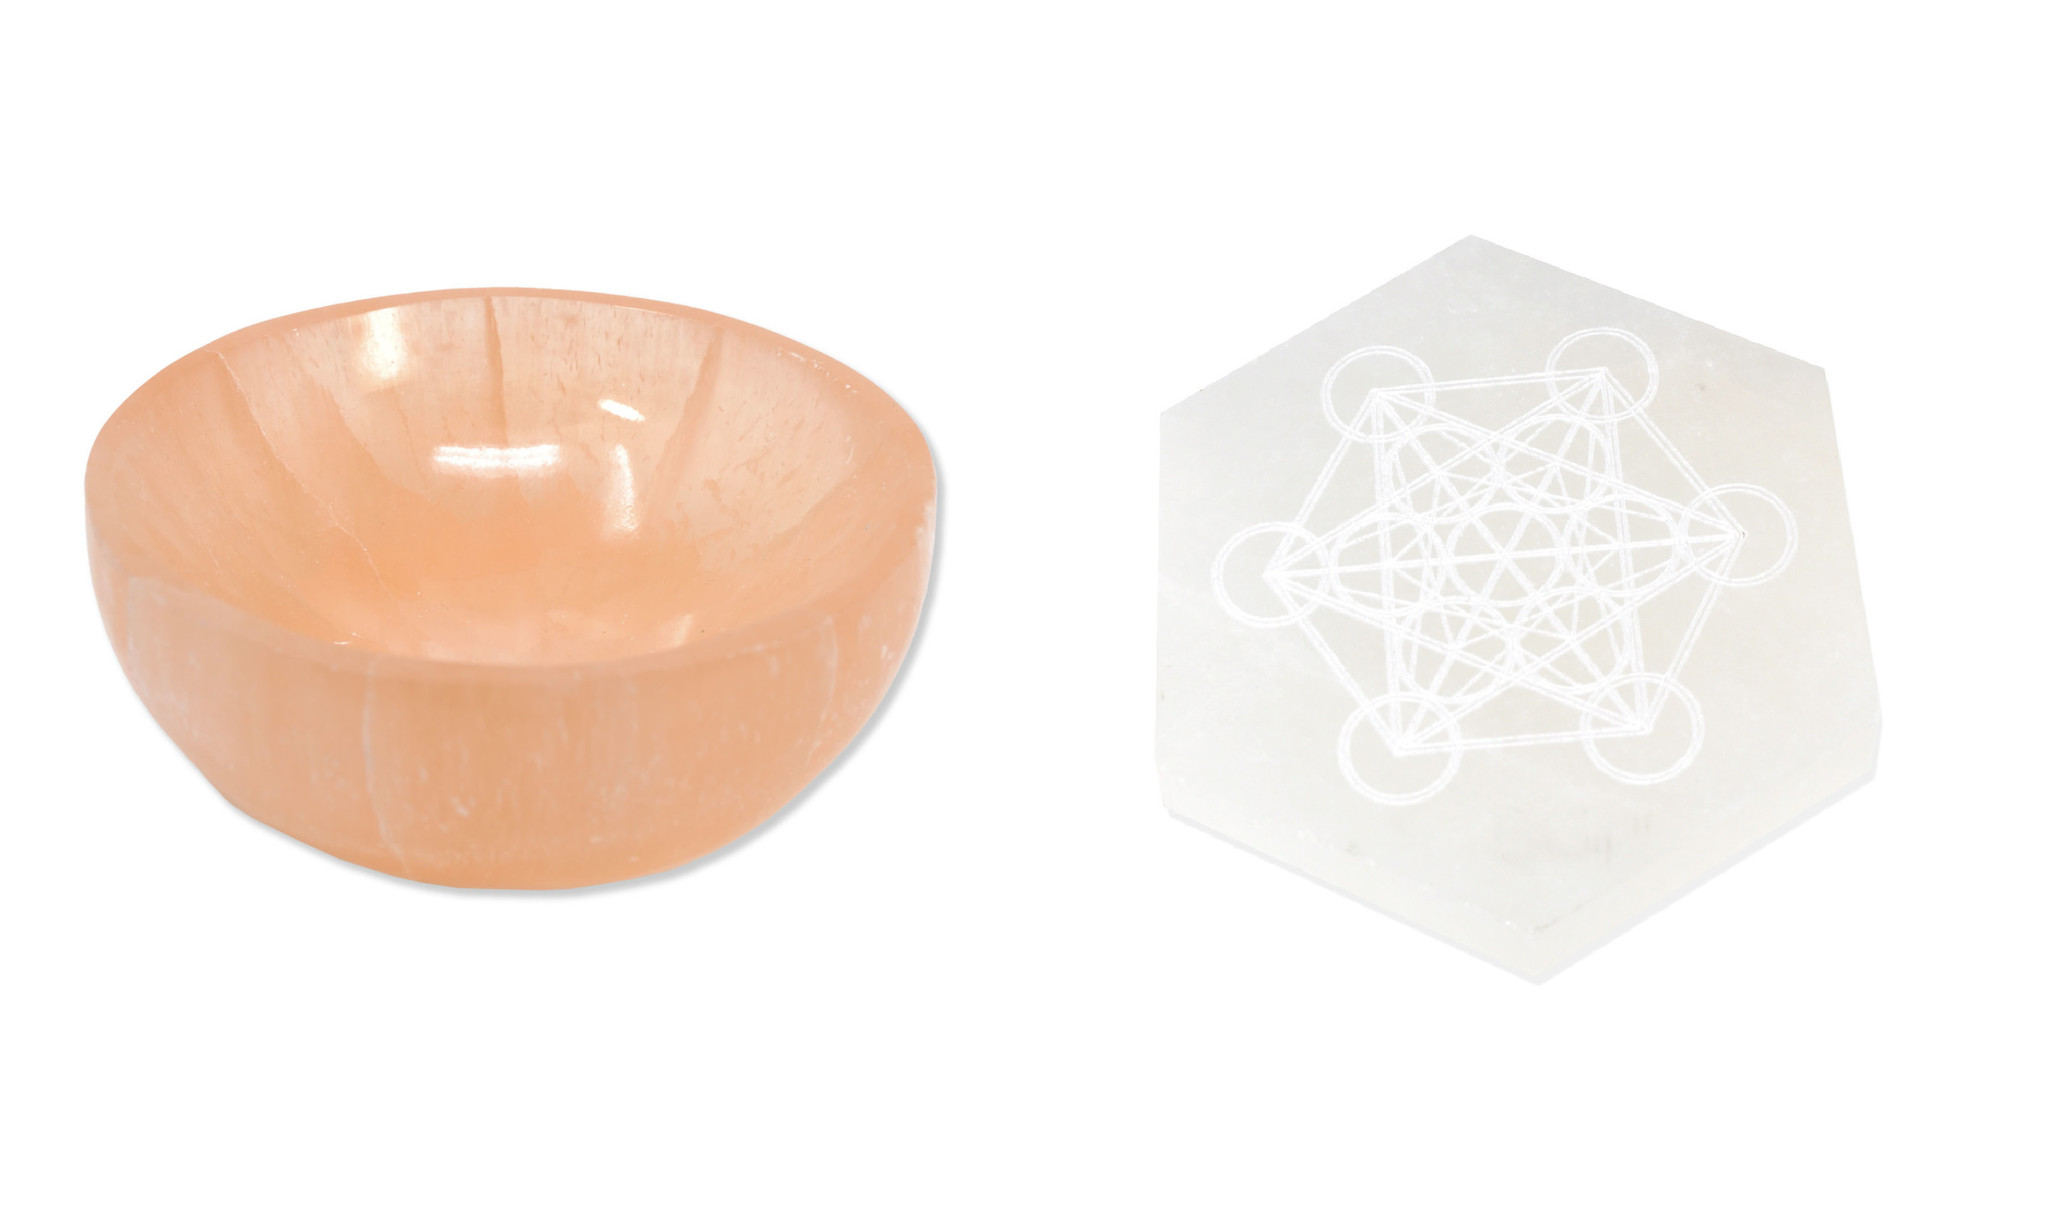 Peachy colored Selenite bowl, about 3 inches in diameter next to a white colored selenite piece engraved with a metatron cube pattern etched into it.